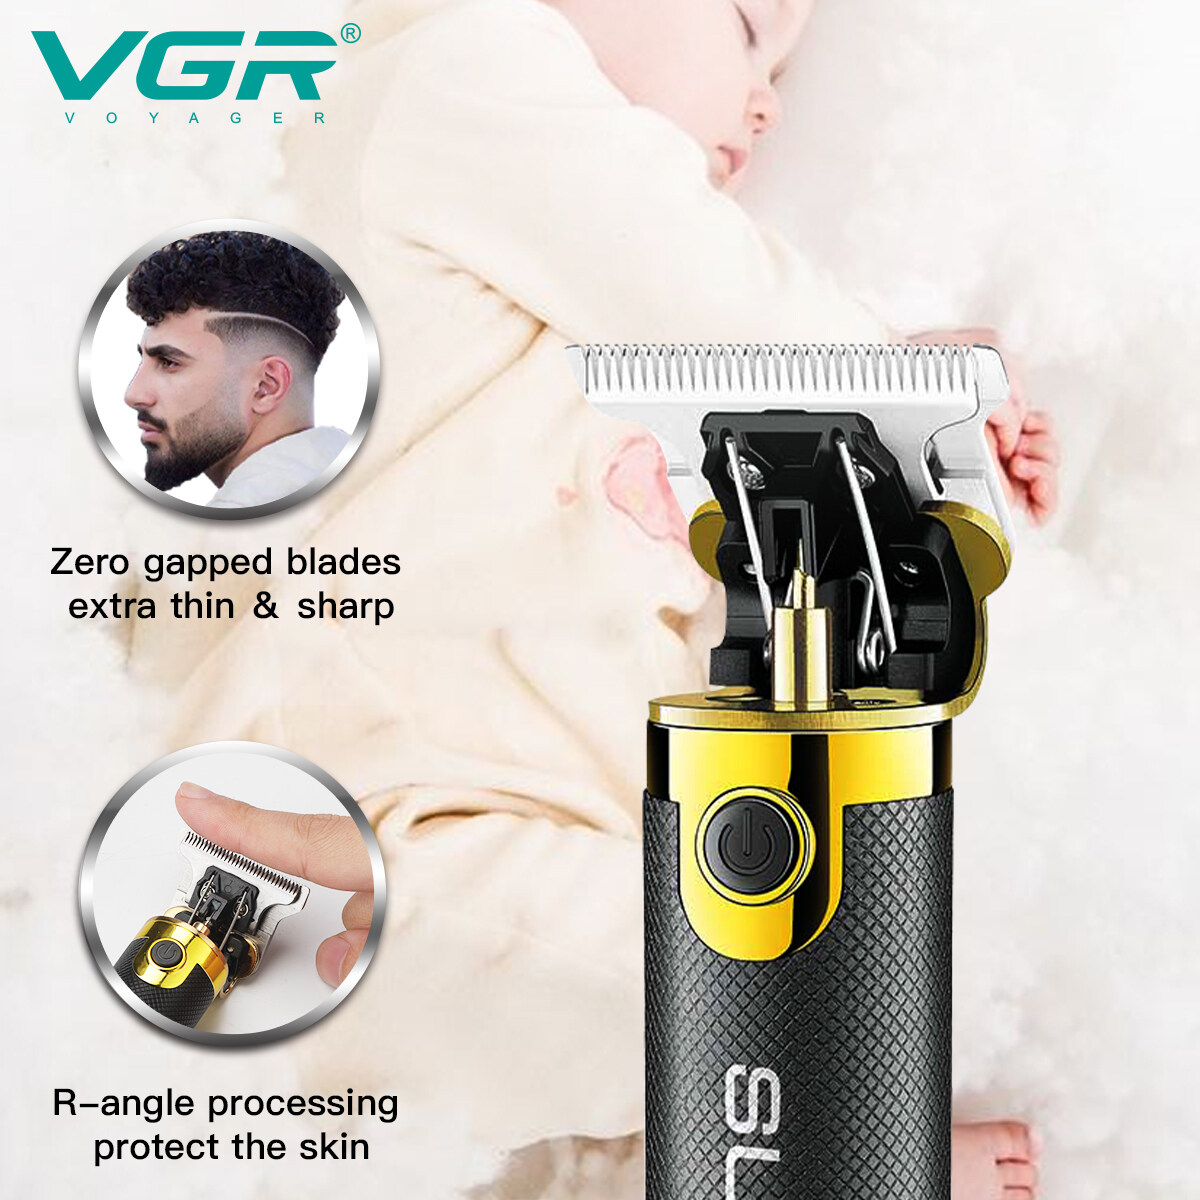 professional hair clipper wholesale, domestic use hair clipper suppliers, high quality hair clipper, oem hair clipper, top trimmer manufacturers